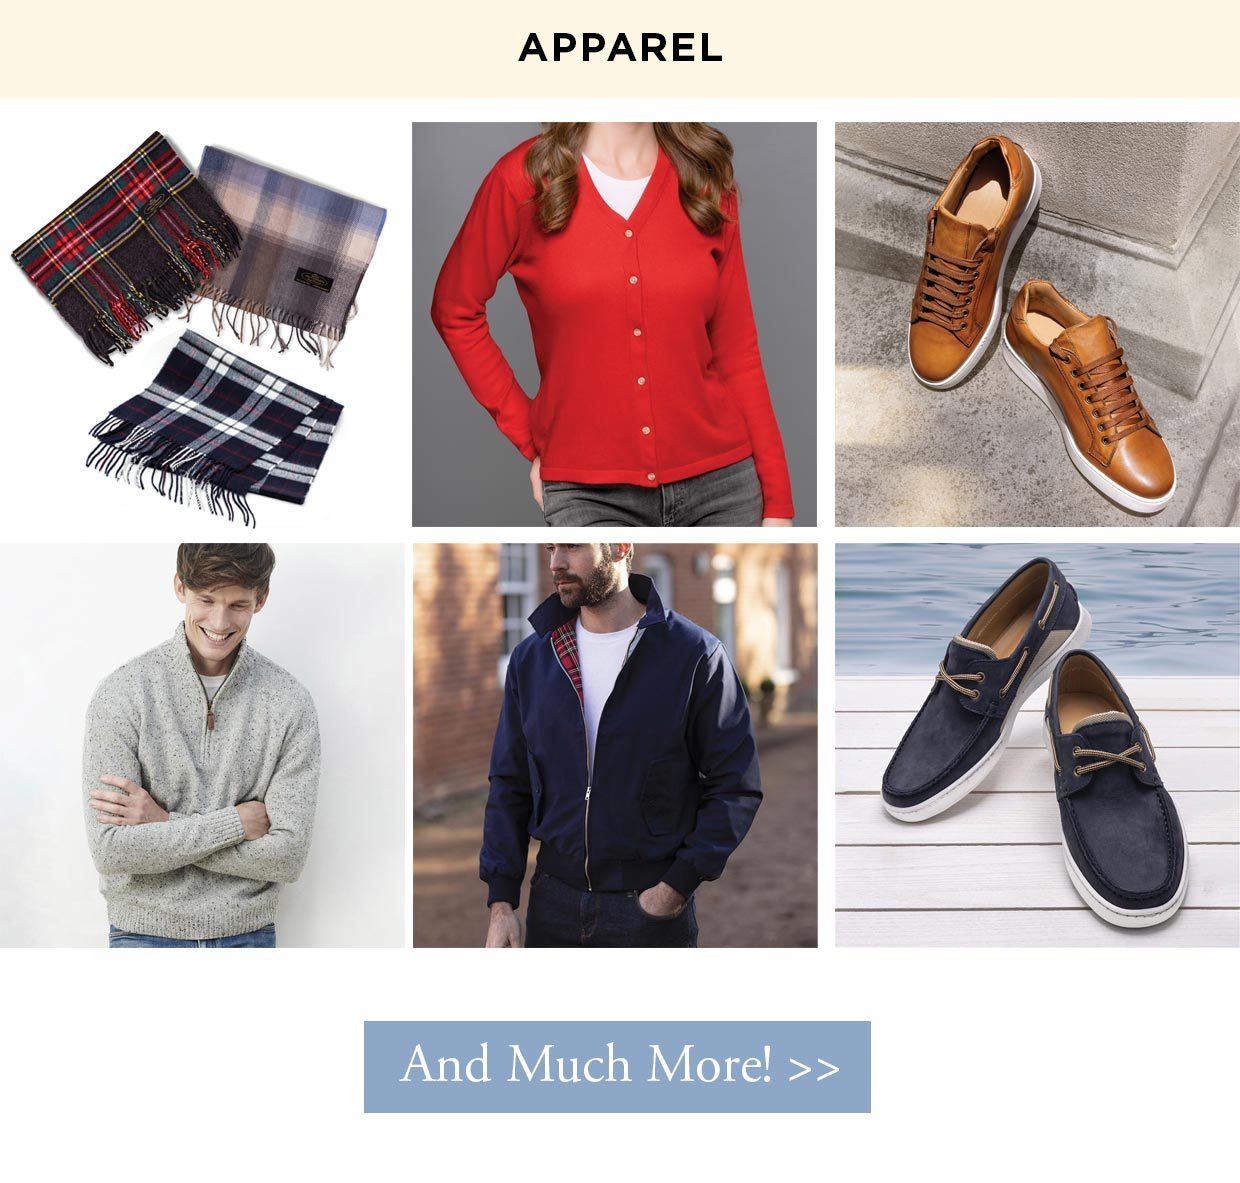 Apparel. Scarves, Sweaters, Sneakers, & Coats. And Much More!